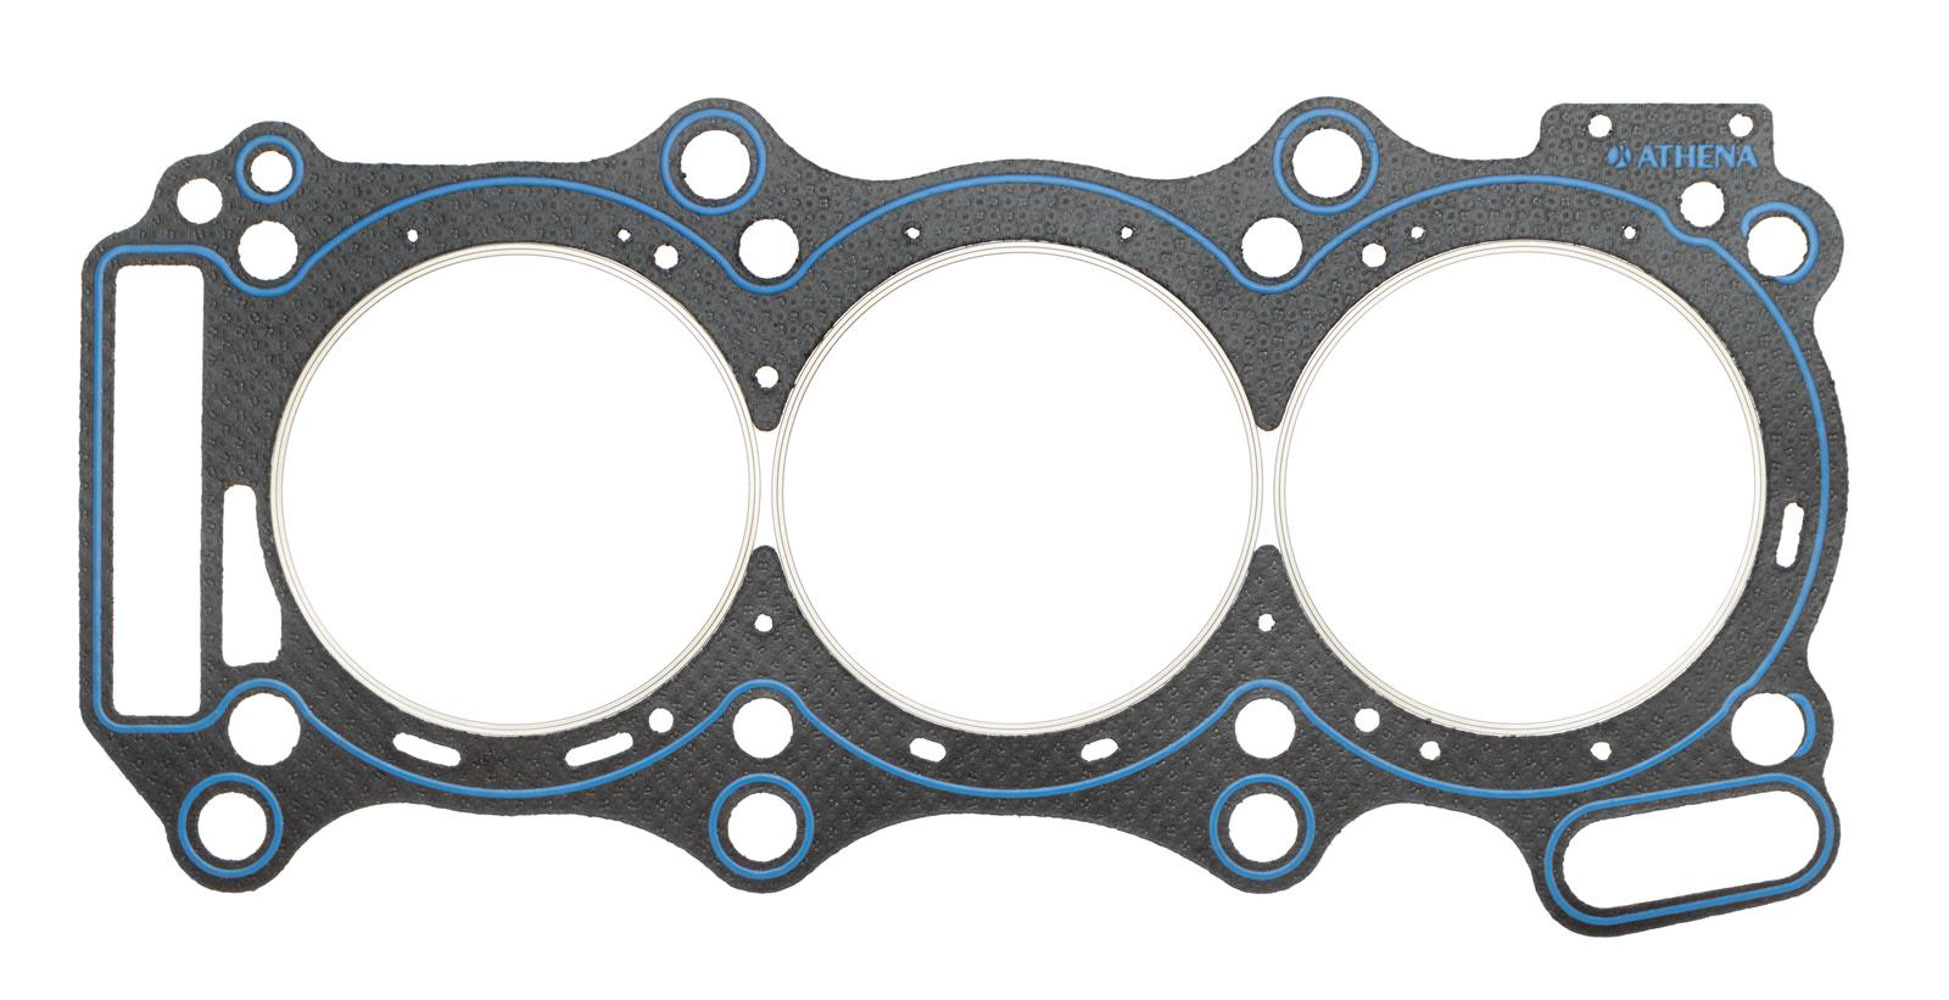 SCE Gaskets CR330068R - Cylinder Head Gasket, Vulcan Cut Ring, 100.50 mm Bore, 1.00 mm Compression Thickness, Steel Core Laminate, Passenger Side, Nissan V6, Each